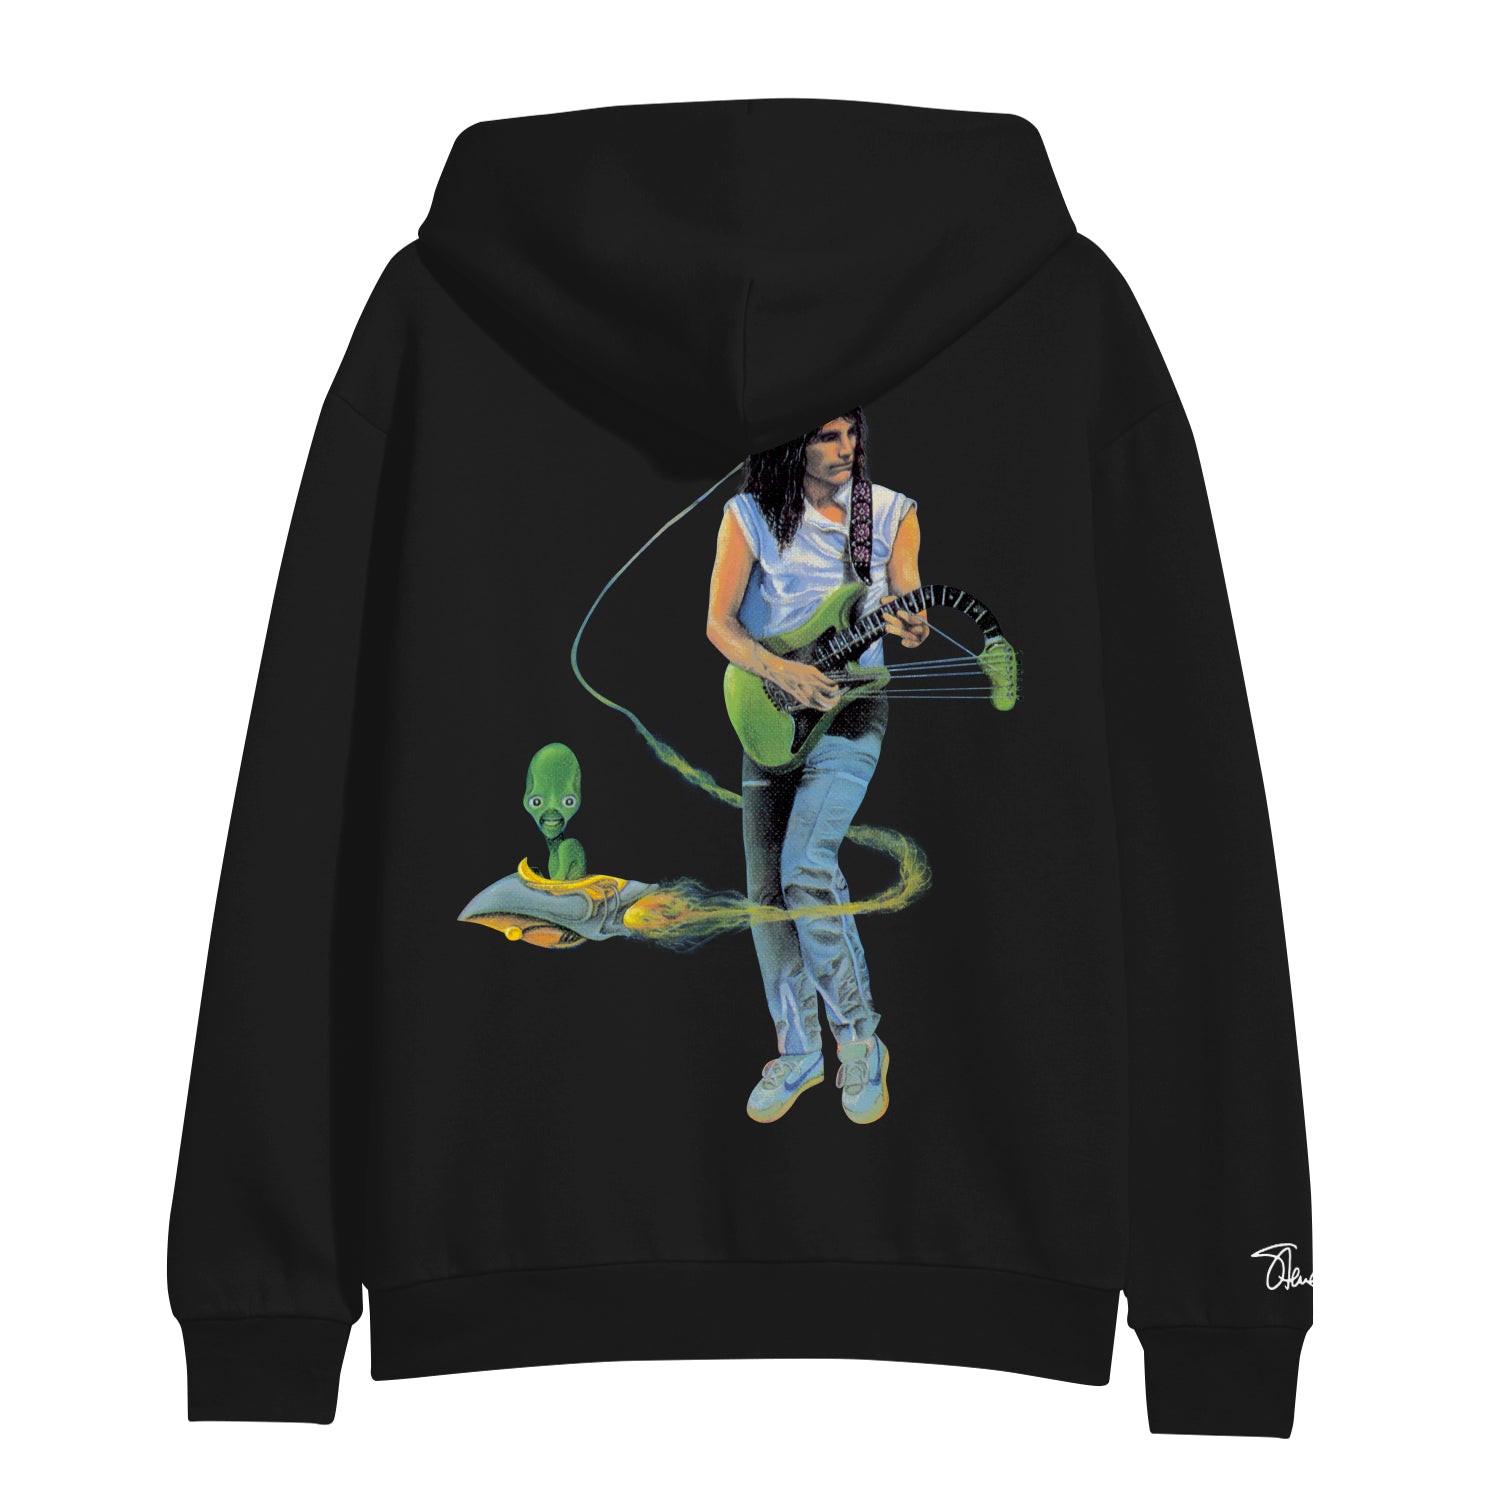 back of black sweatshirt against white background. The back features a graphic of steve vai playing a green guitar. the neck of the guitar droops down. swirling around steve is an alien in a small ship. the right sleeve at the bottom in white text is steve vai's signature, printed on the hoodie.